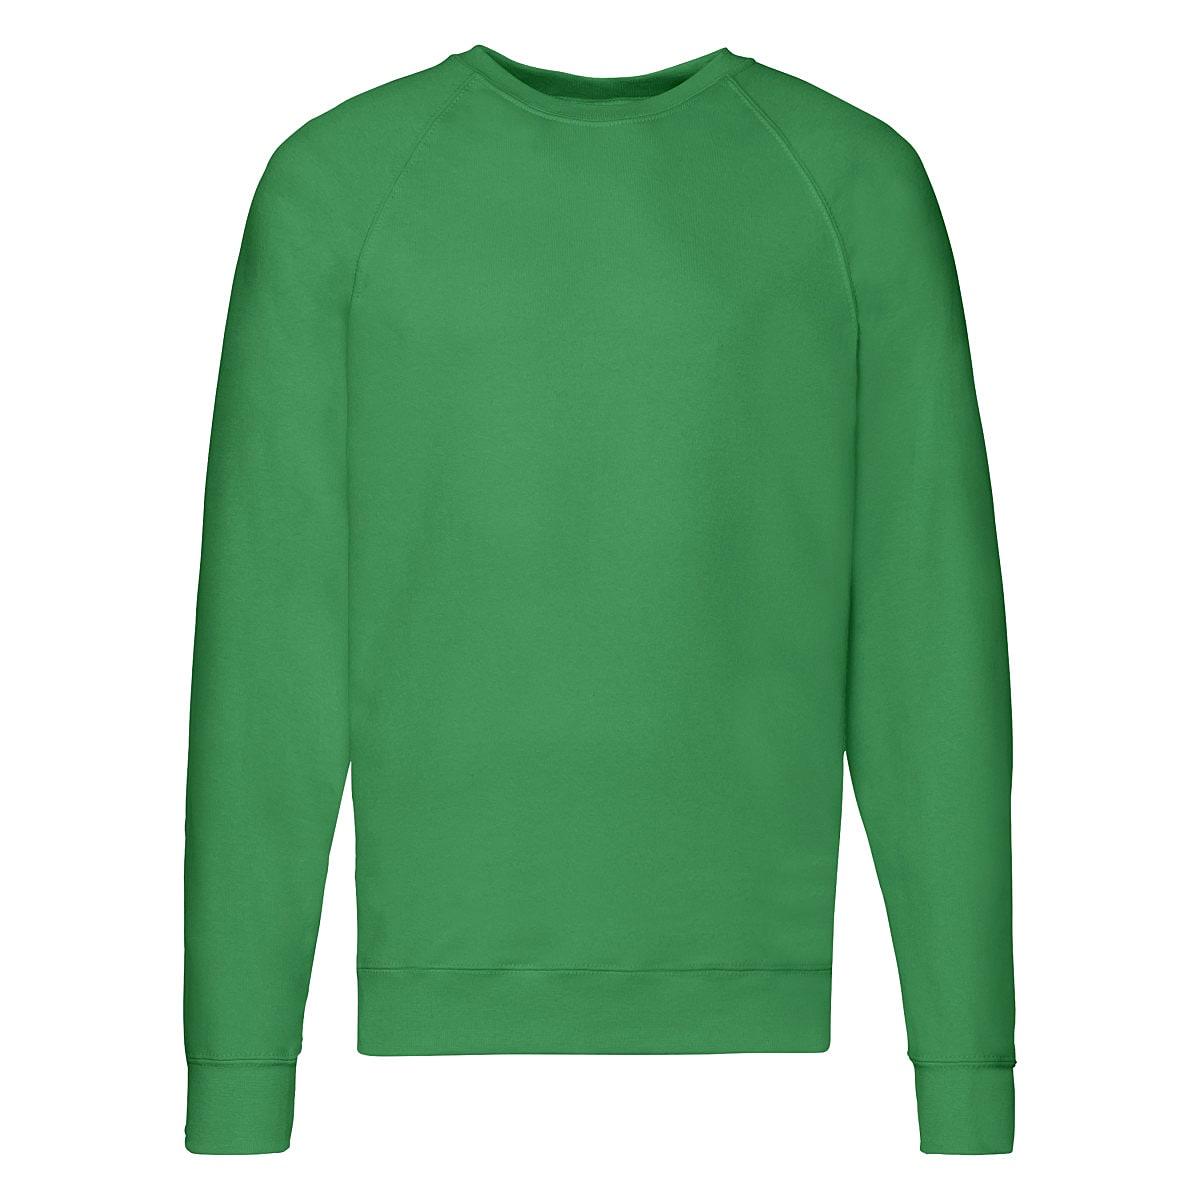 Fruit Of The Loom Mens Lightweight Raglan Sweater in Kelly Green (Product Code: 62138)